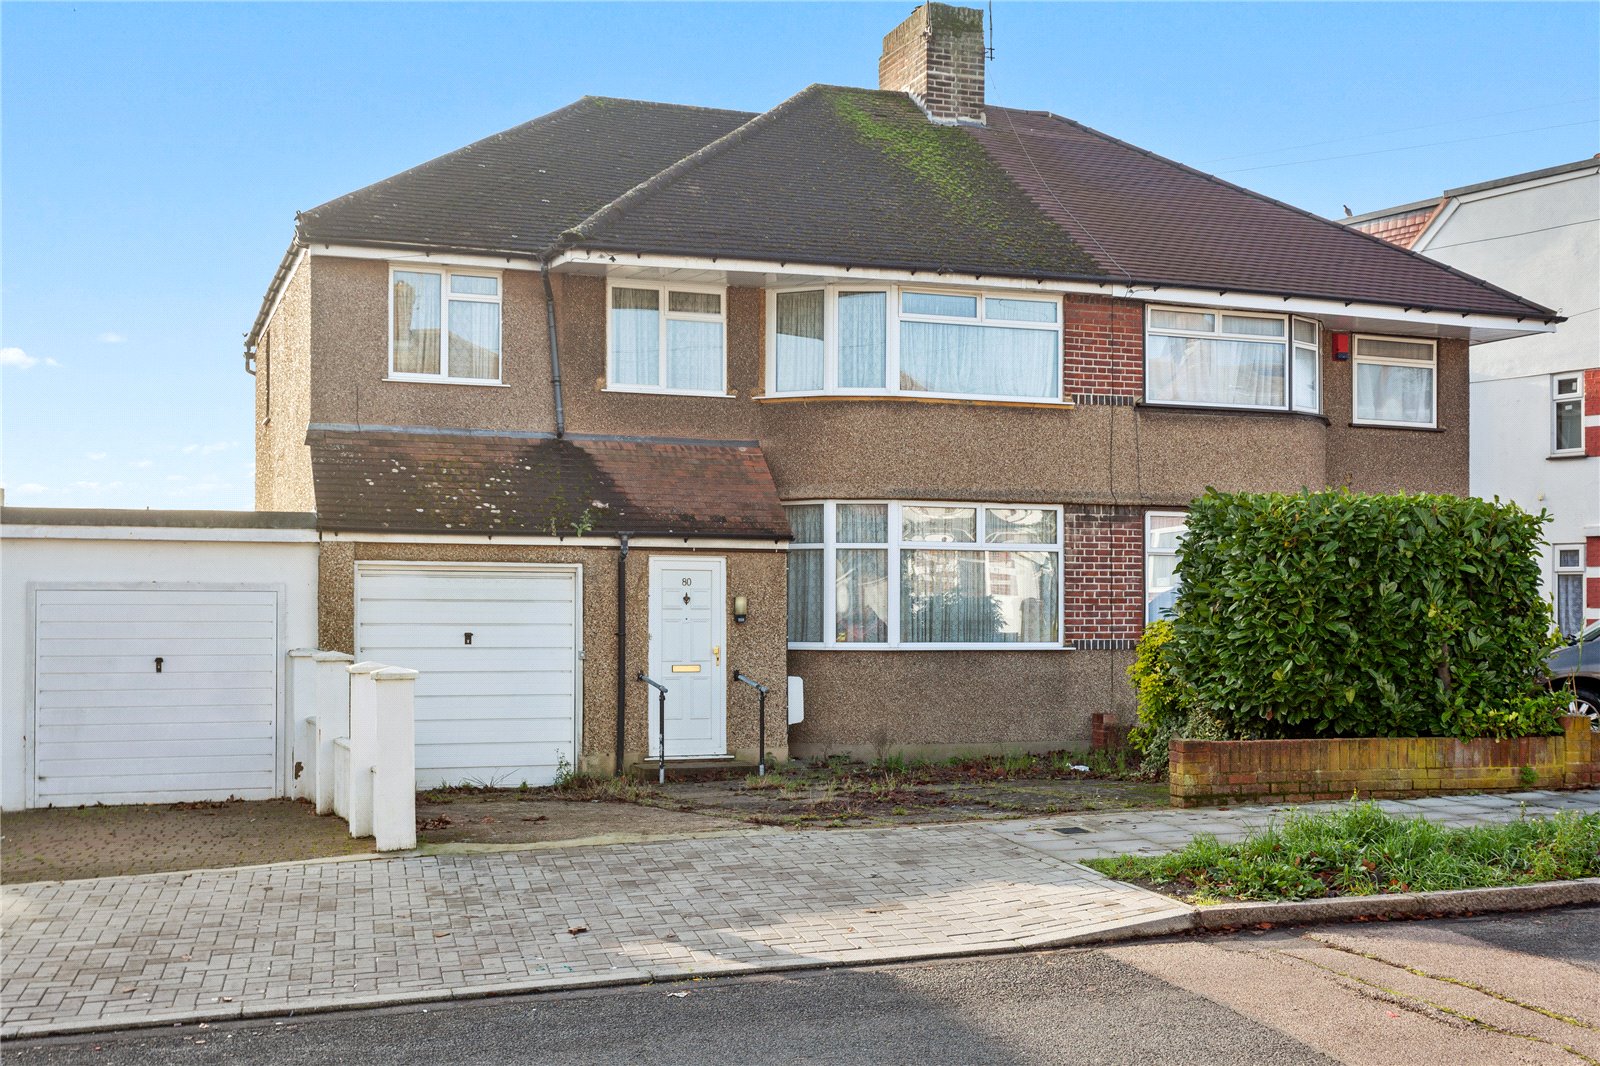 St. Edmunds Drive, Stanmore HA7